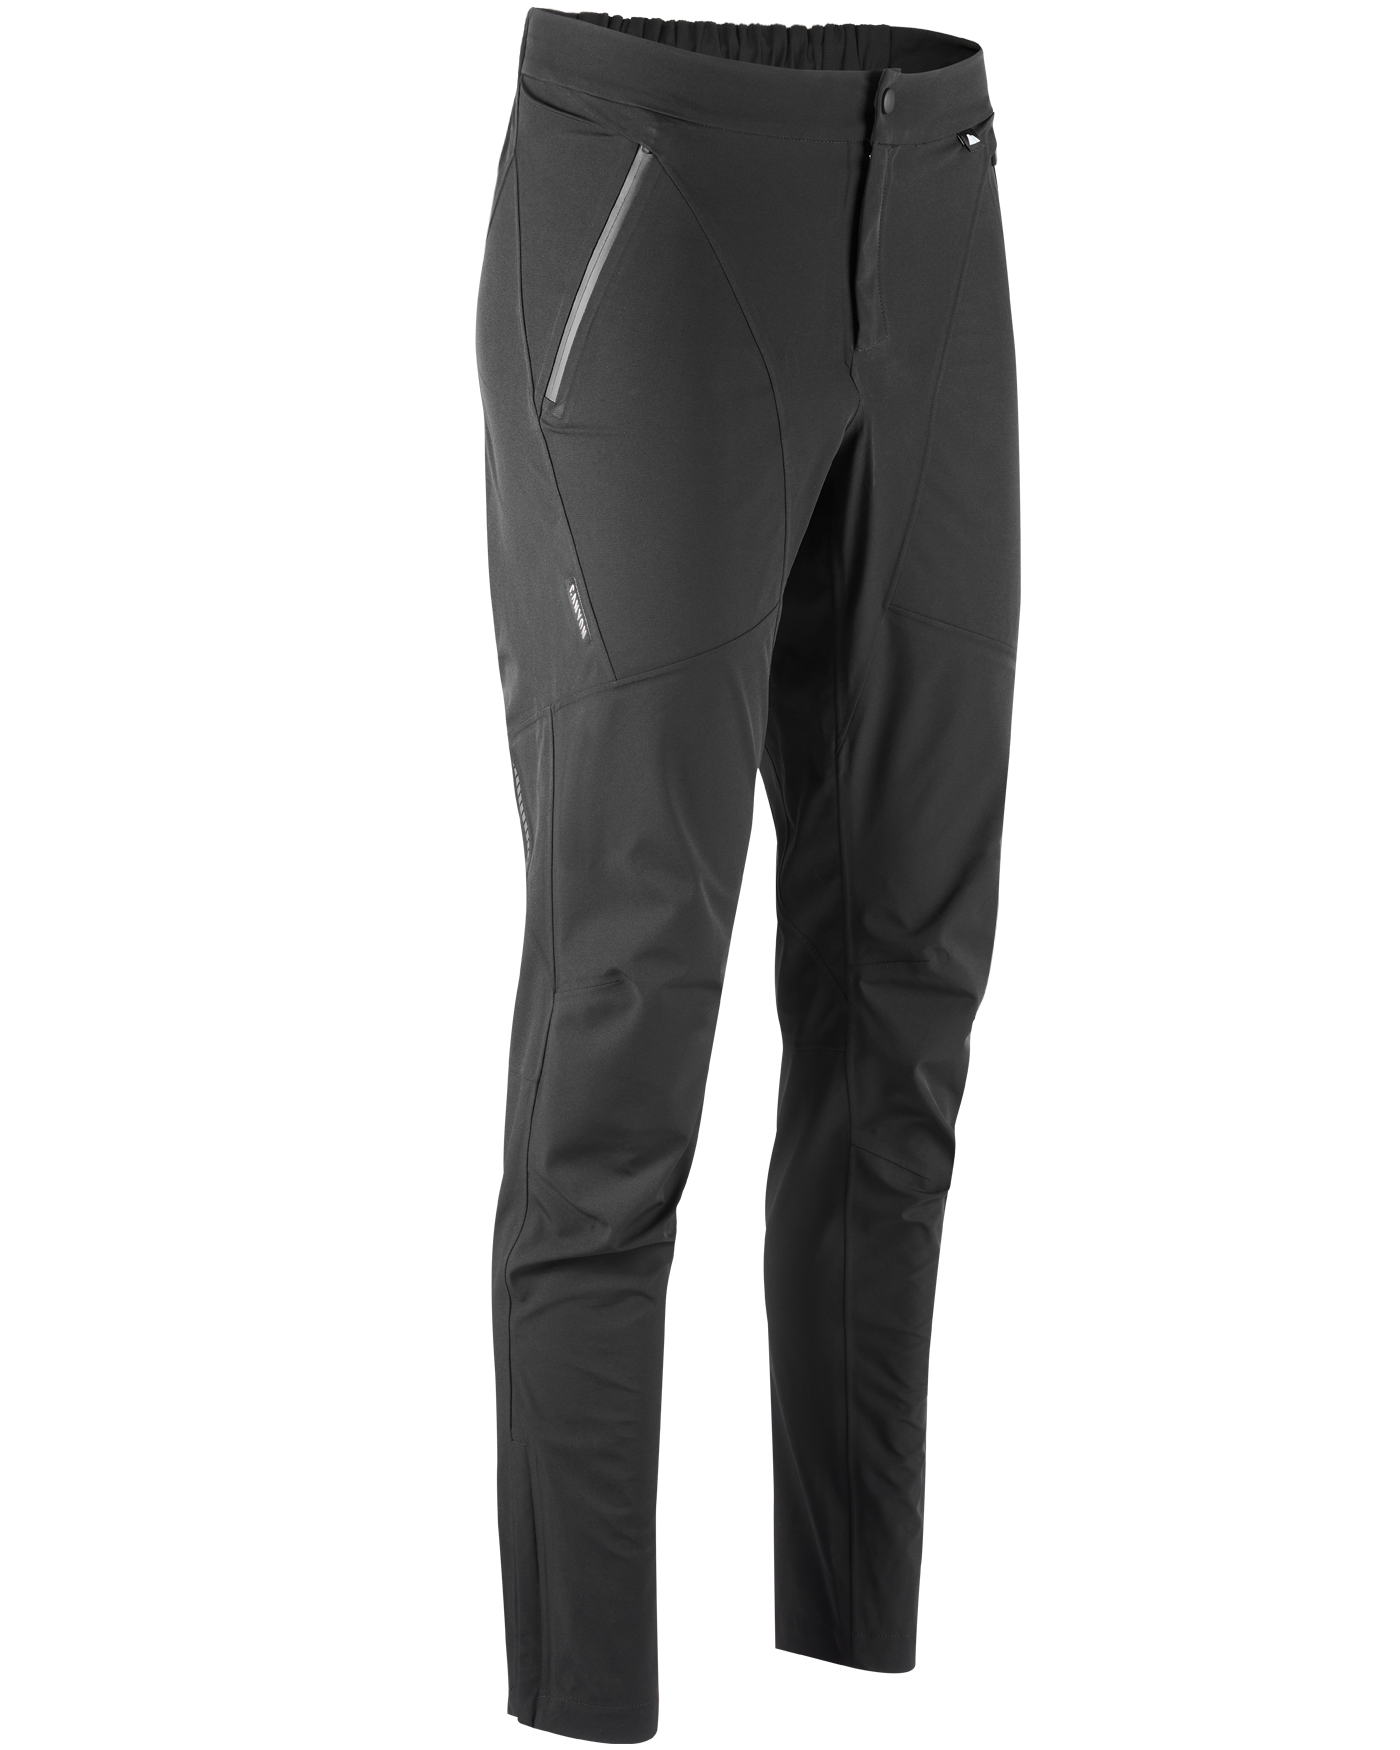 Excellent Rain Trousers Loose Cycling Rain Pants Unisex Stretchy